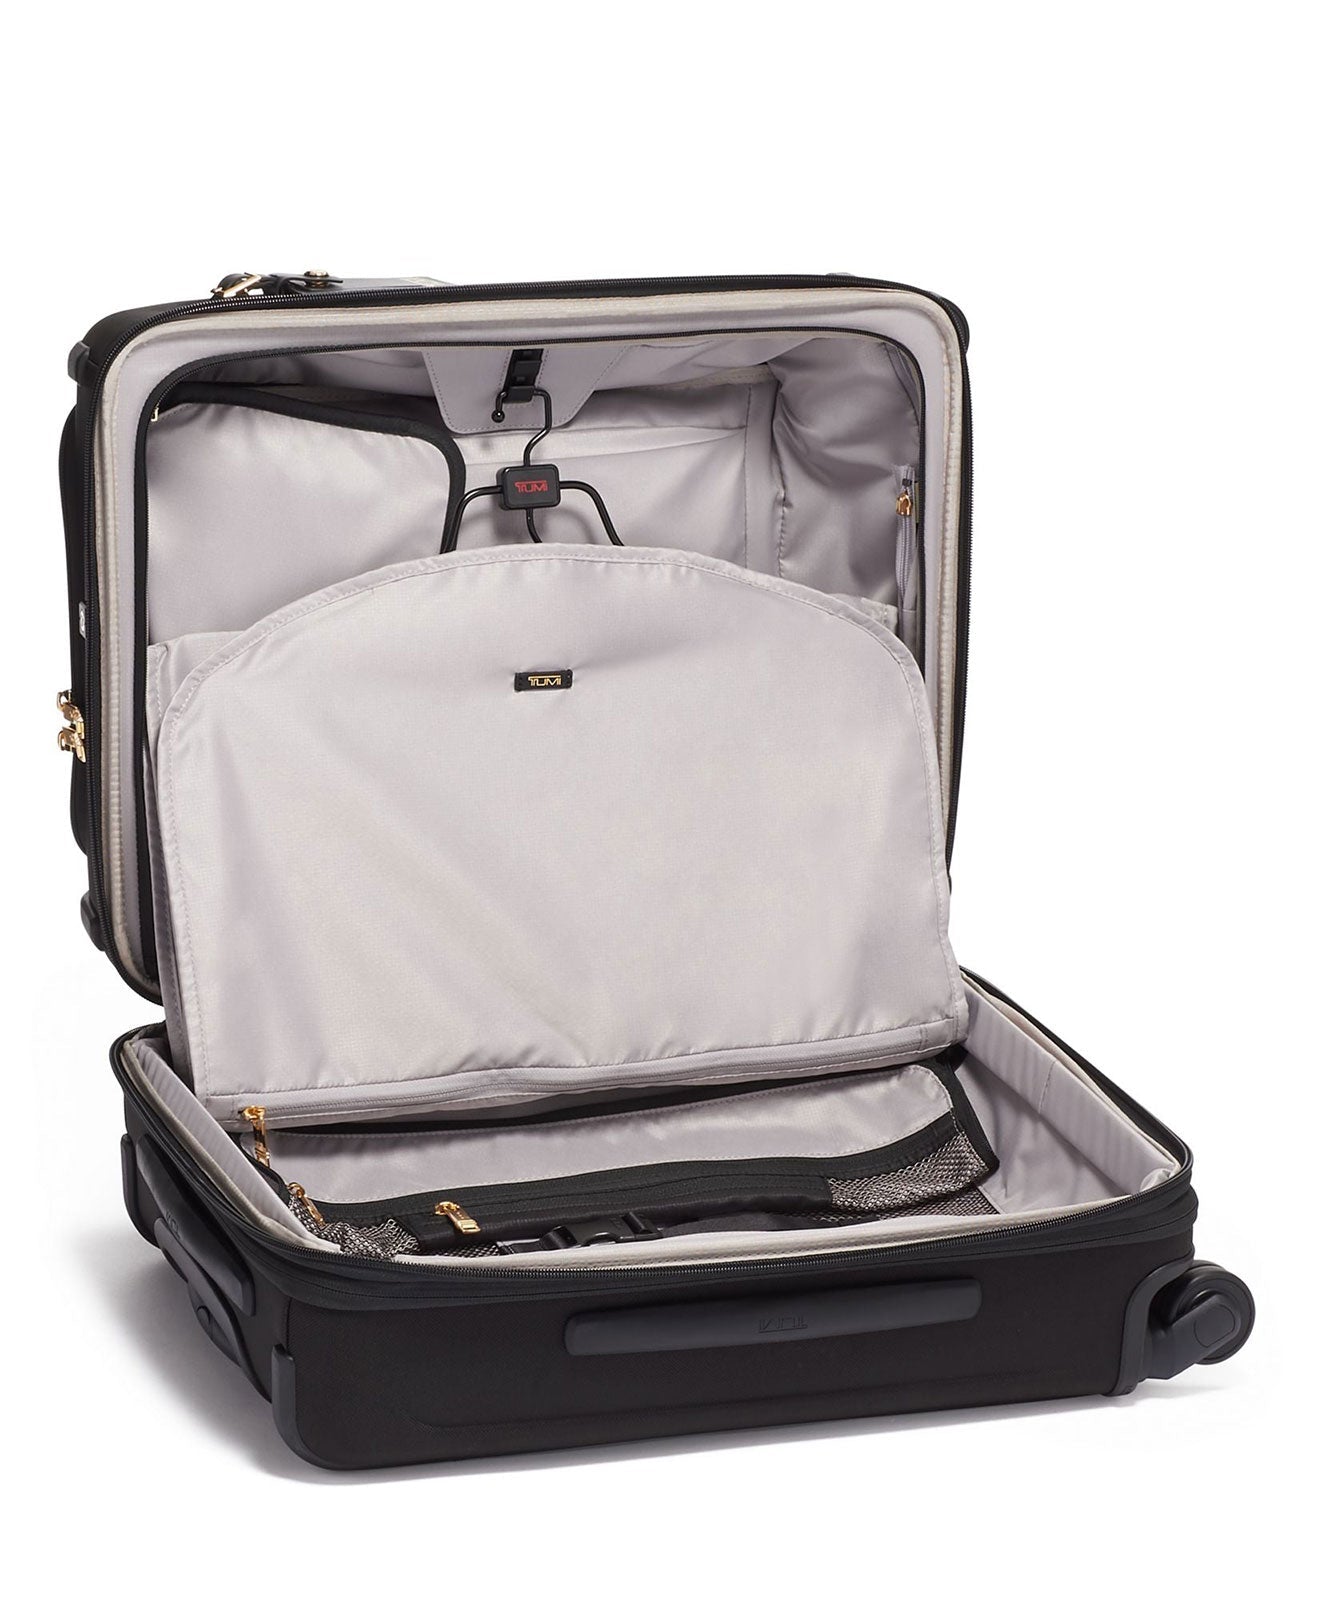 Tumi Continental Dual Access 4 Wheeled Carry-On, Black